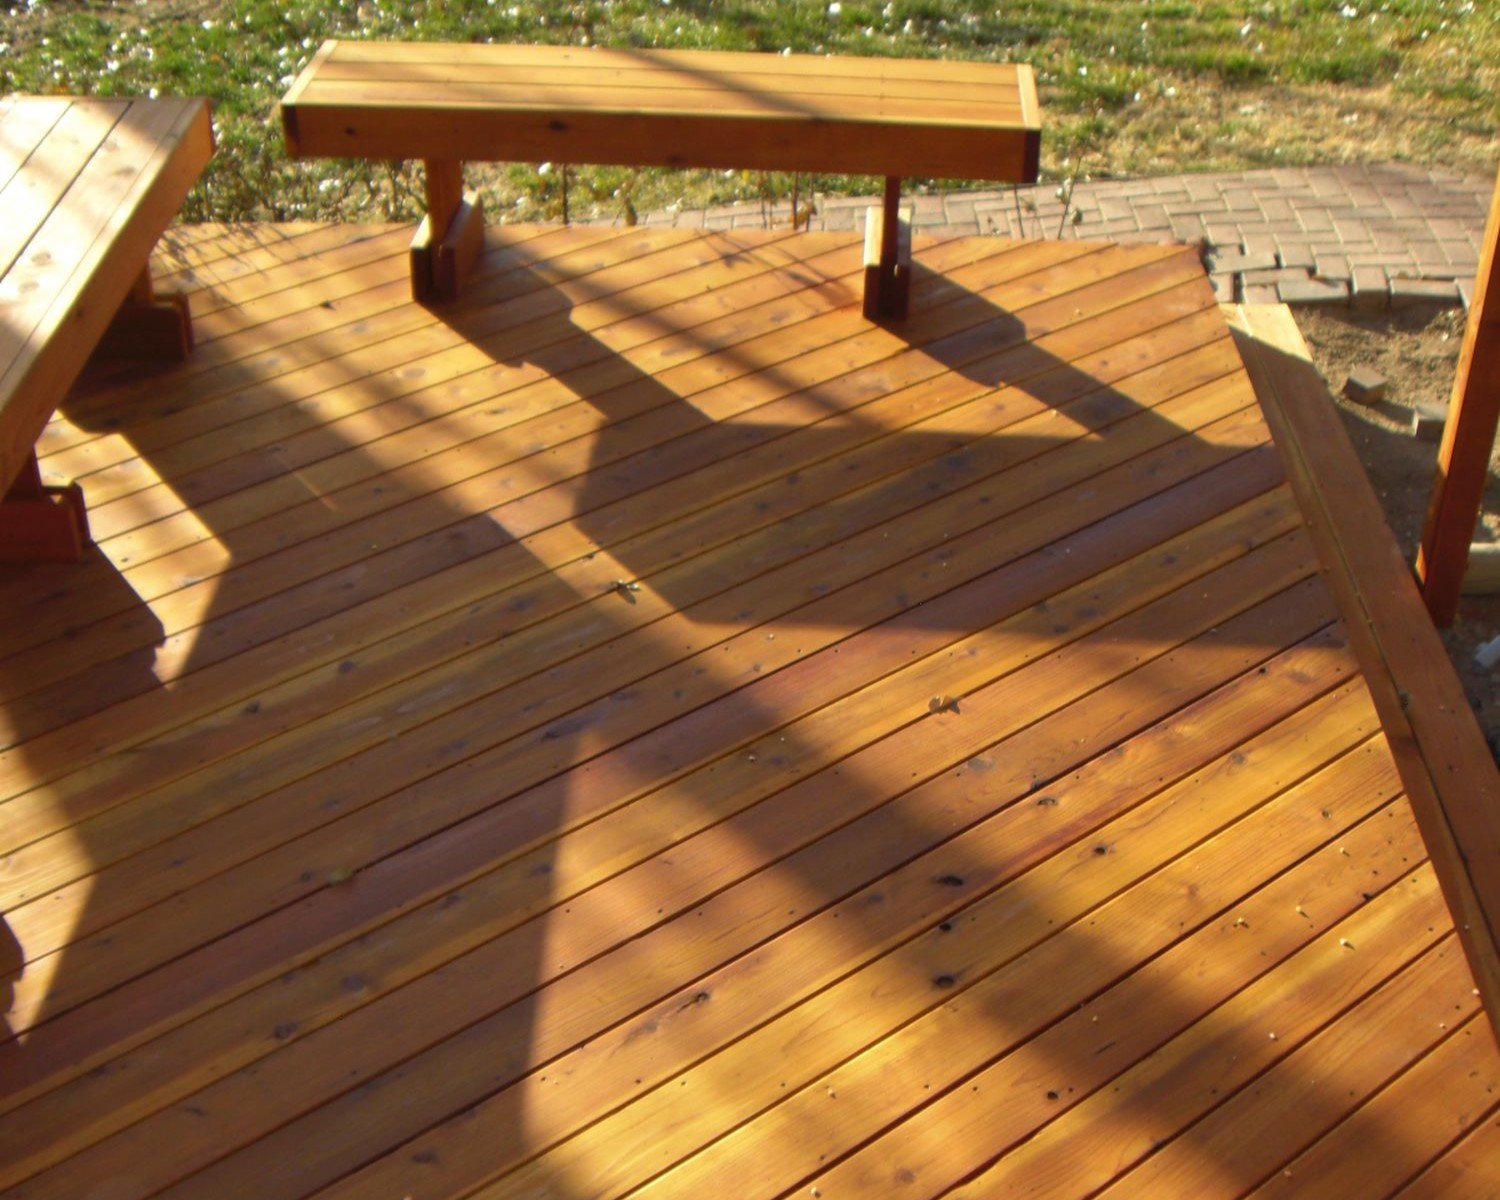 45-degree angle Cedar deck with two custom built benches